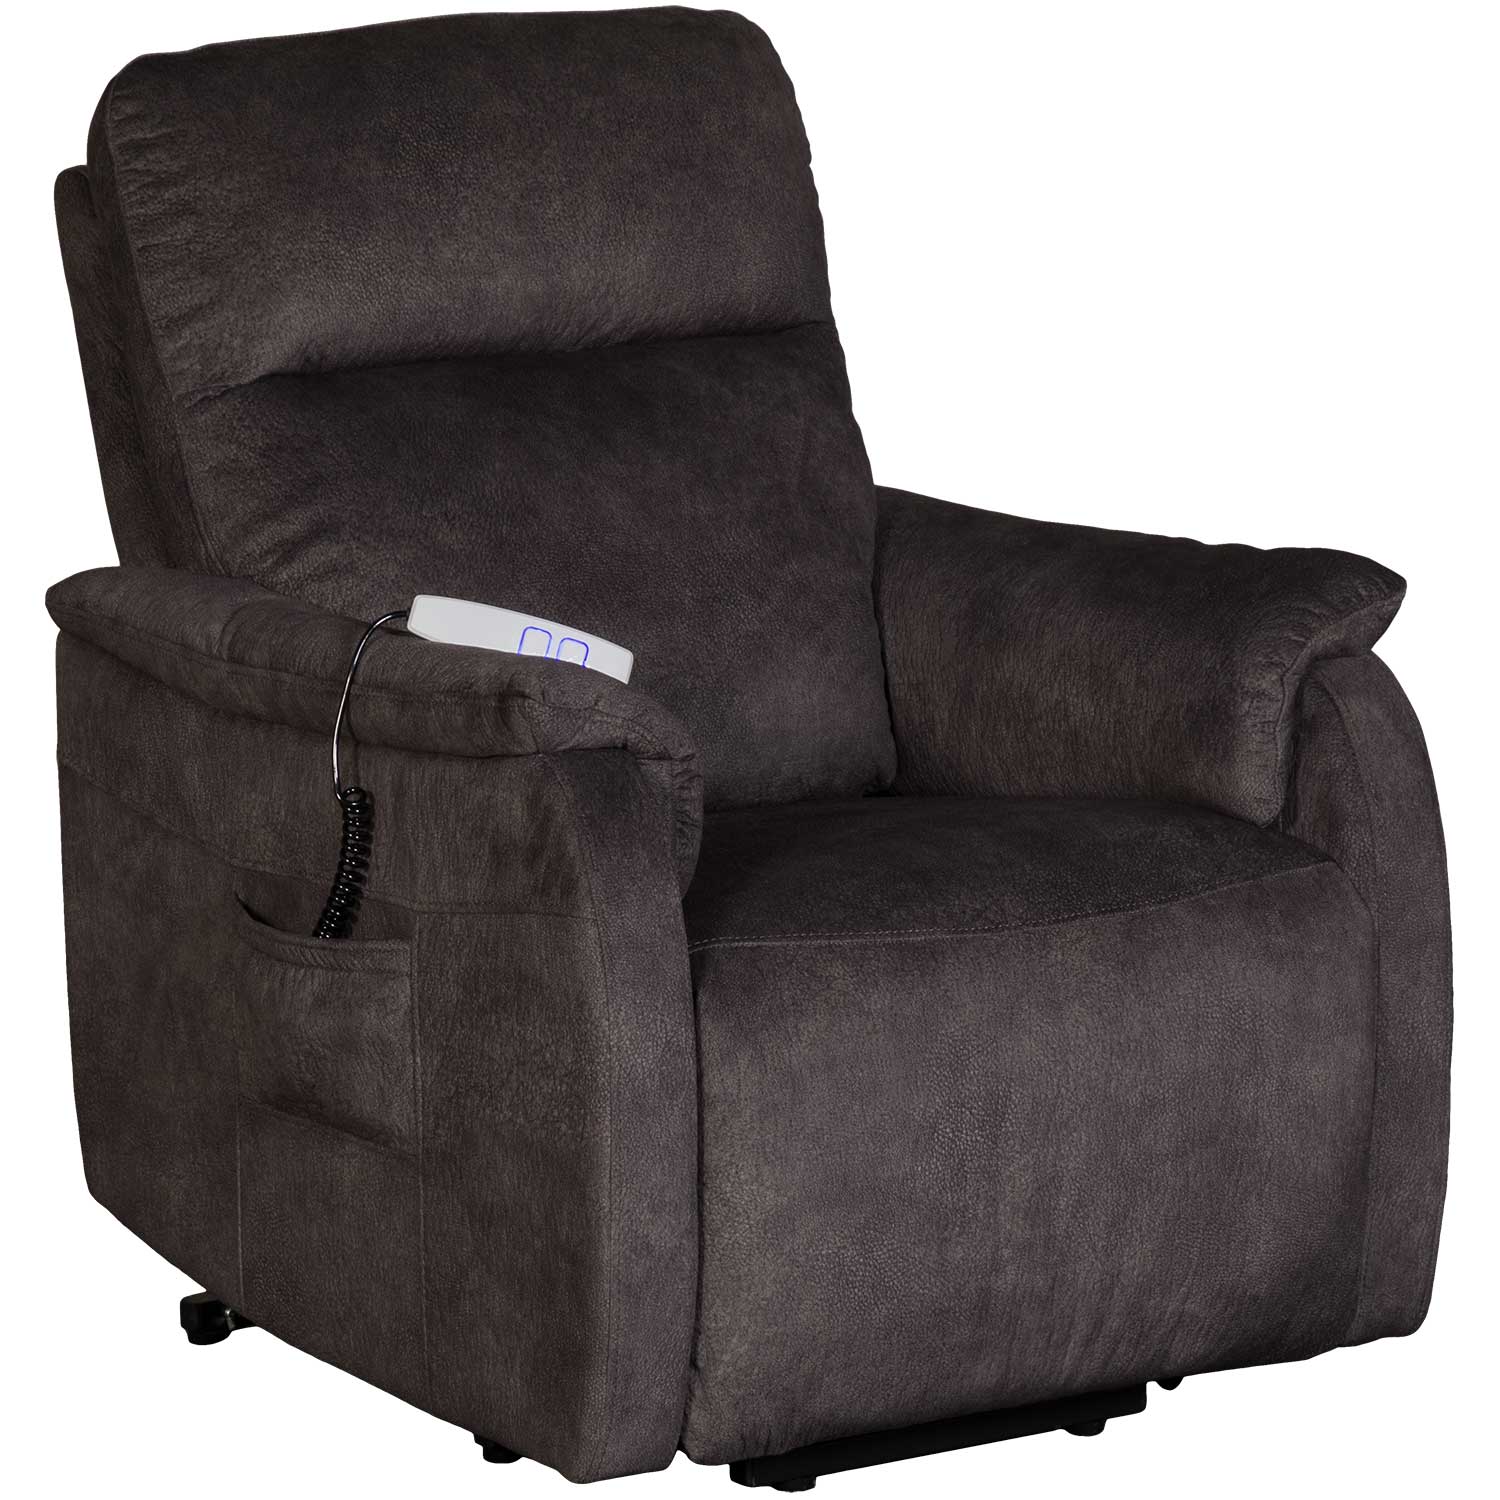 Catnapper 4762 Thornton 764762-7-1152-78-1252-78 Power Lay Flat Recliner  with Power Lumbar Support and Power Headrest, Value City Furniture